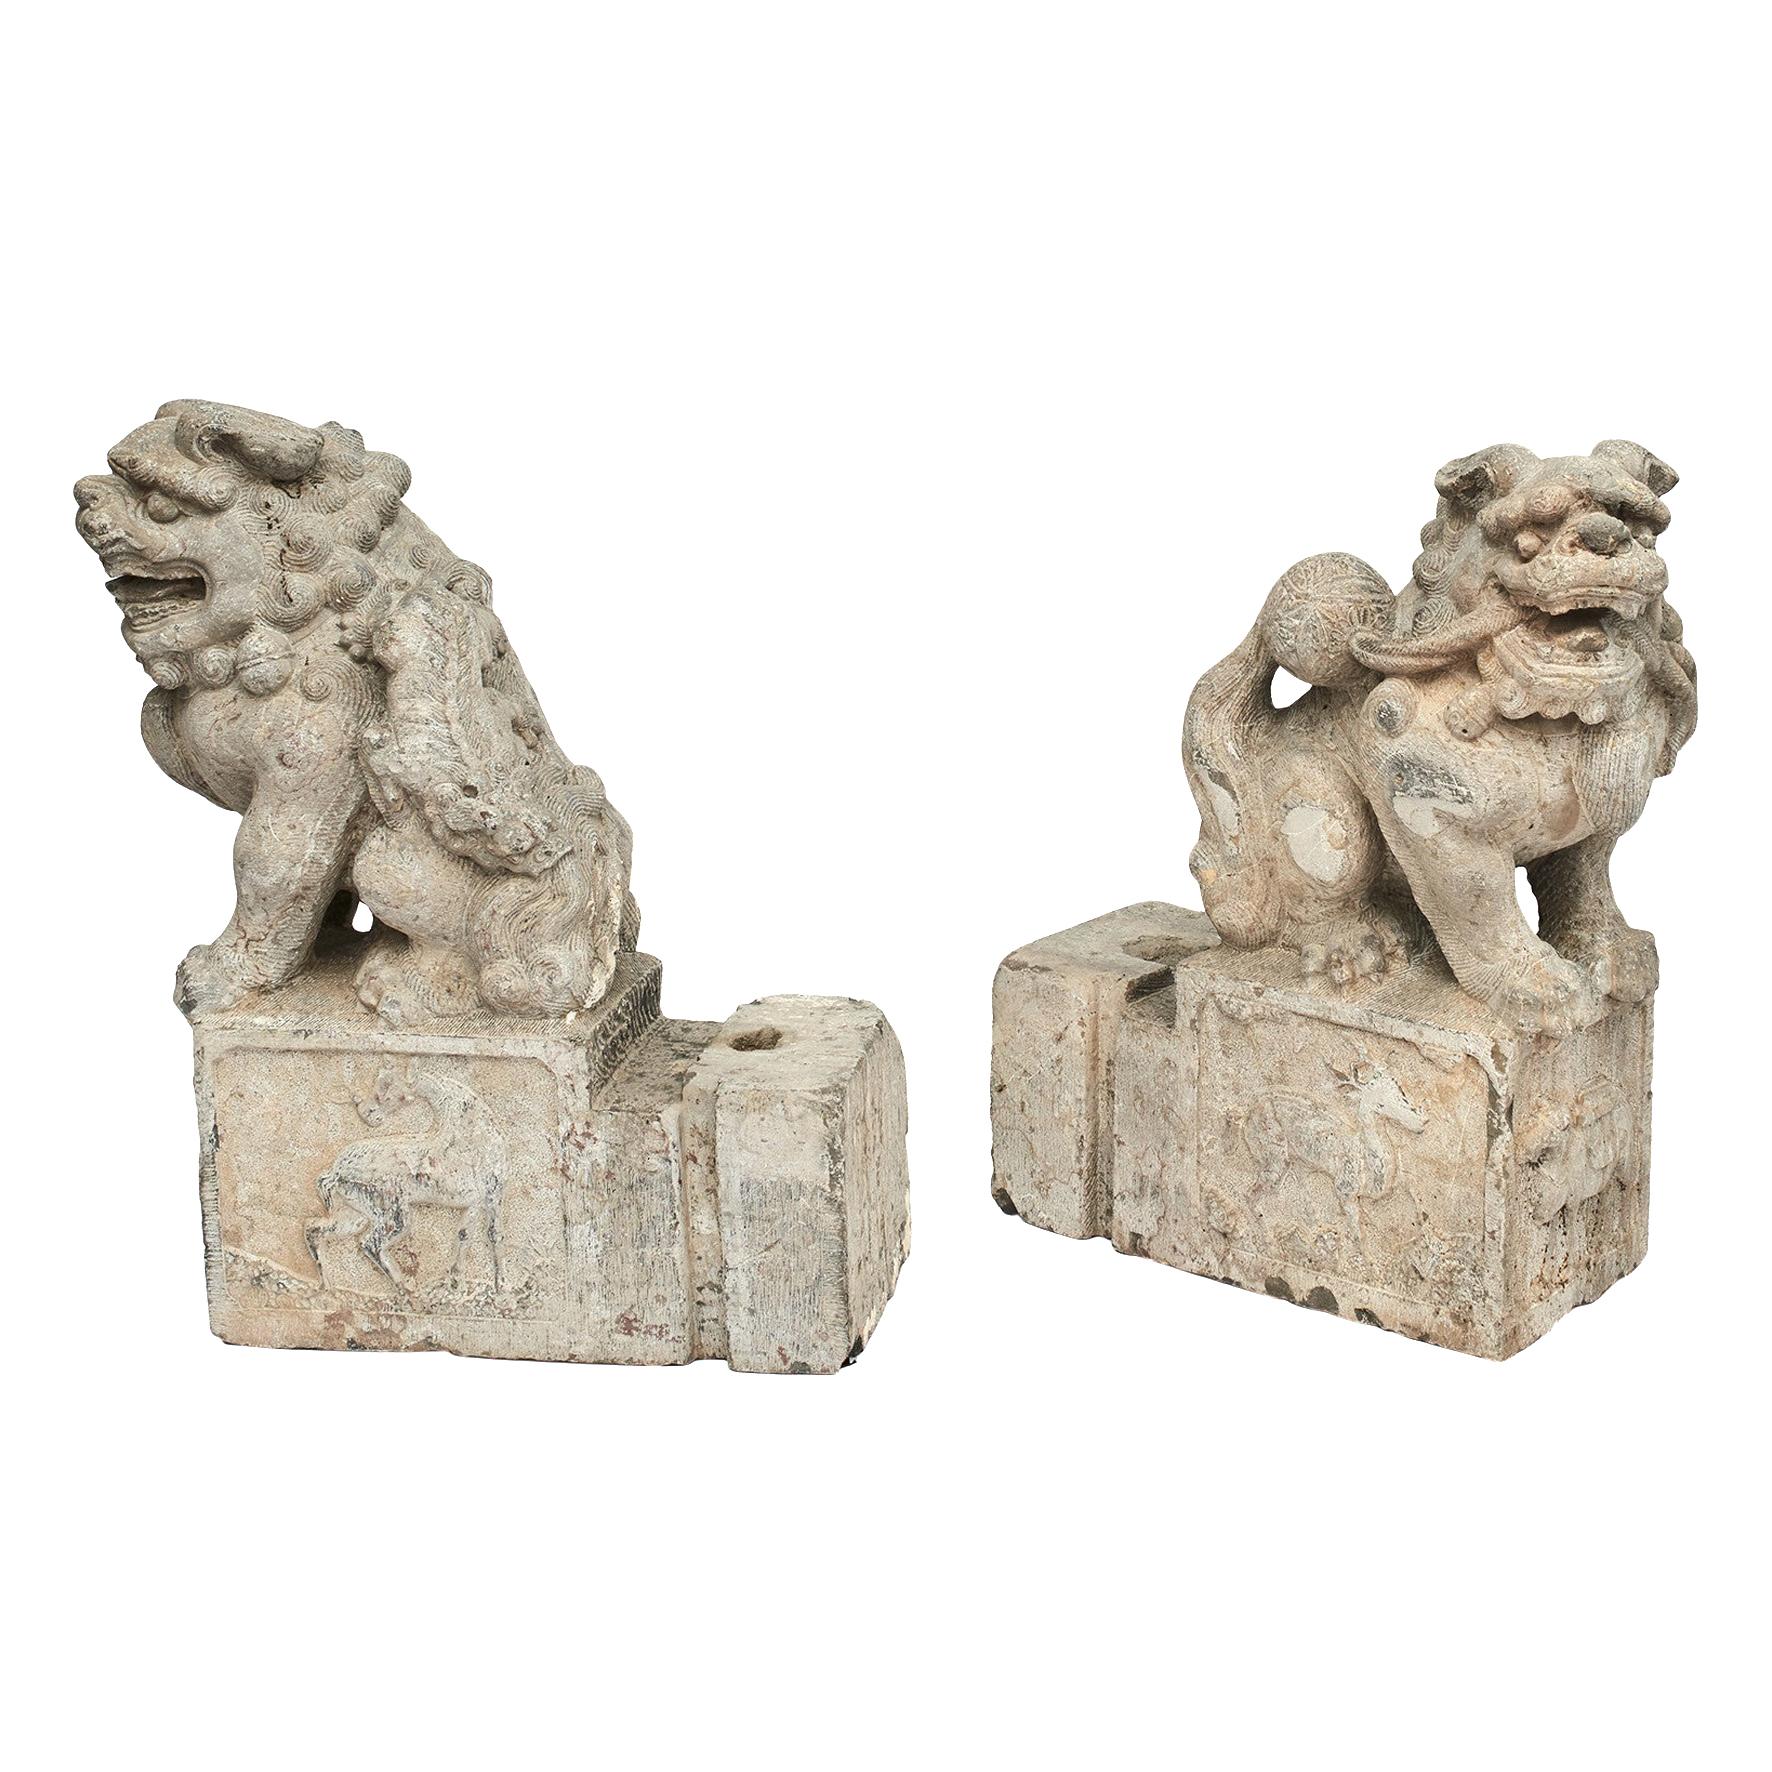 Antique Pair of Late Ming Dynasty Silk Road Carved Stone Guardian Lions For Sale